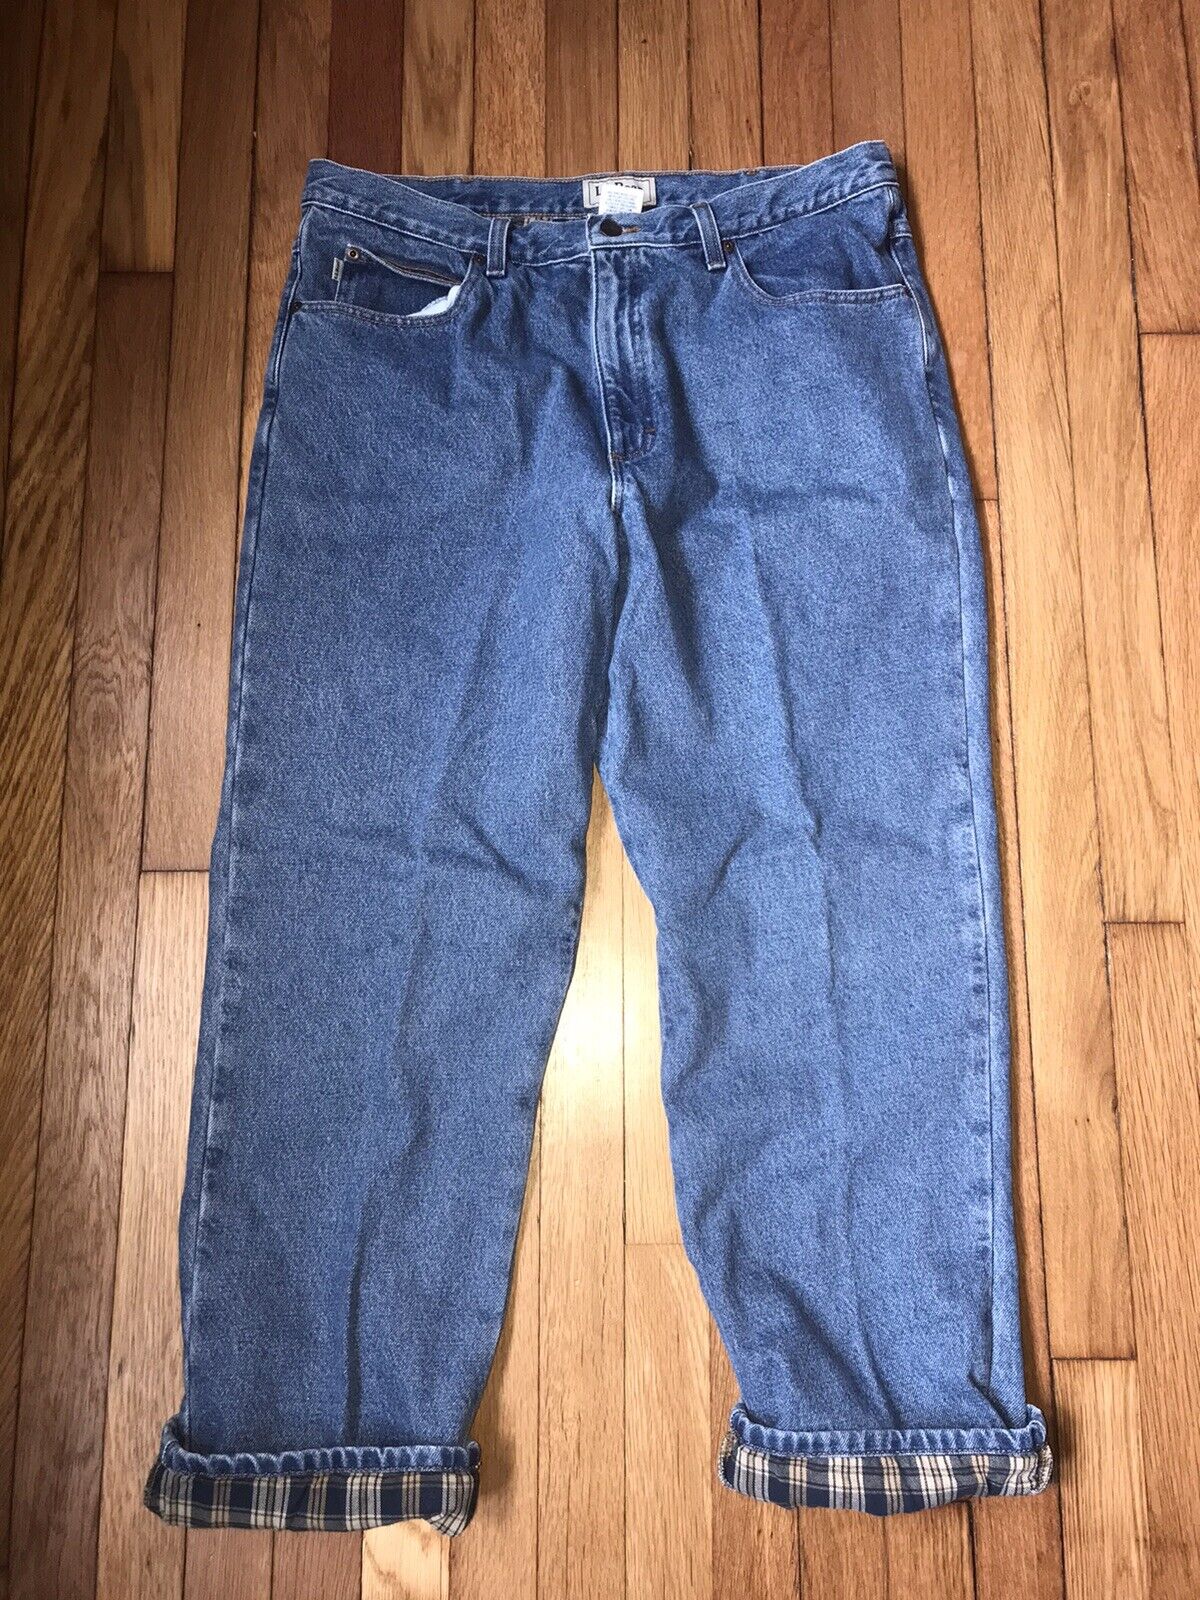 VINTAGE  LL BEAN FLANNEL LINED JEANS mens 36 x 30